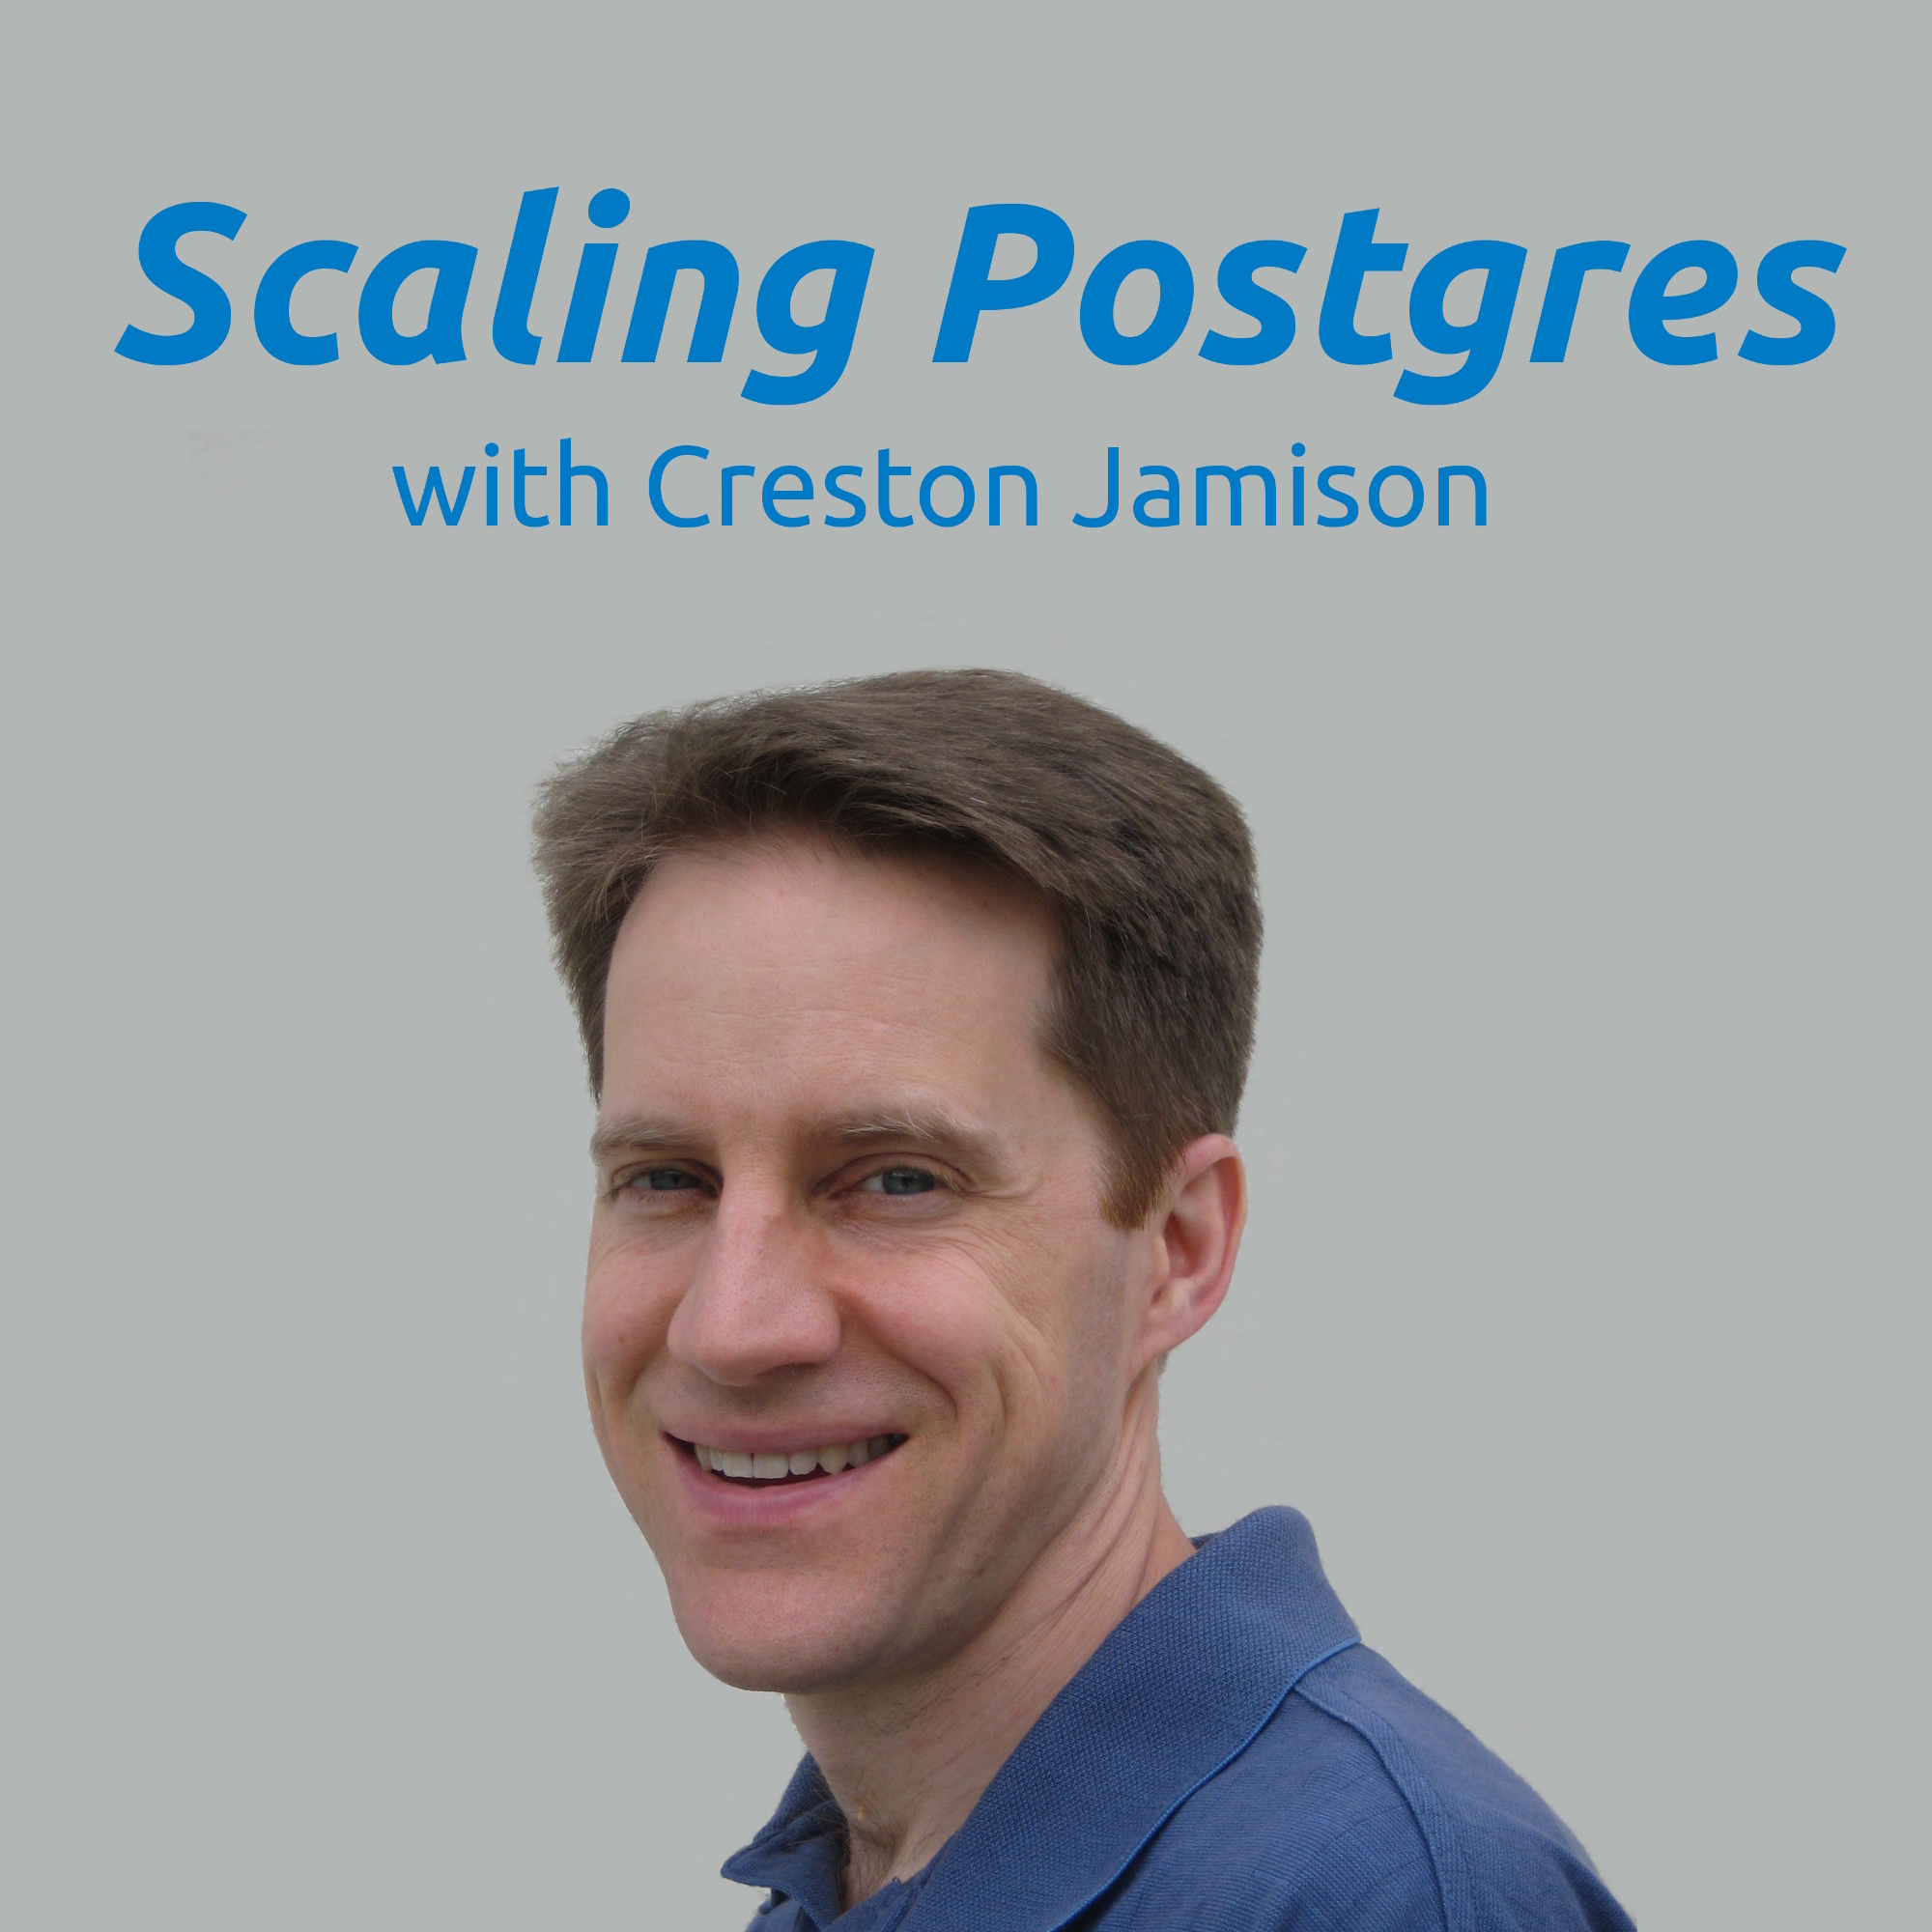 Non-Relational Data, Contributers, Security Features, High Availability | Scaling Postgres 98